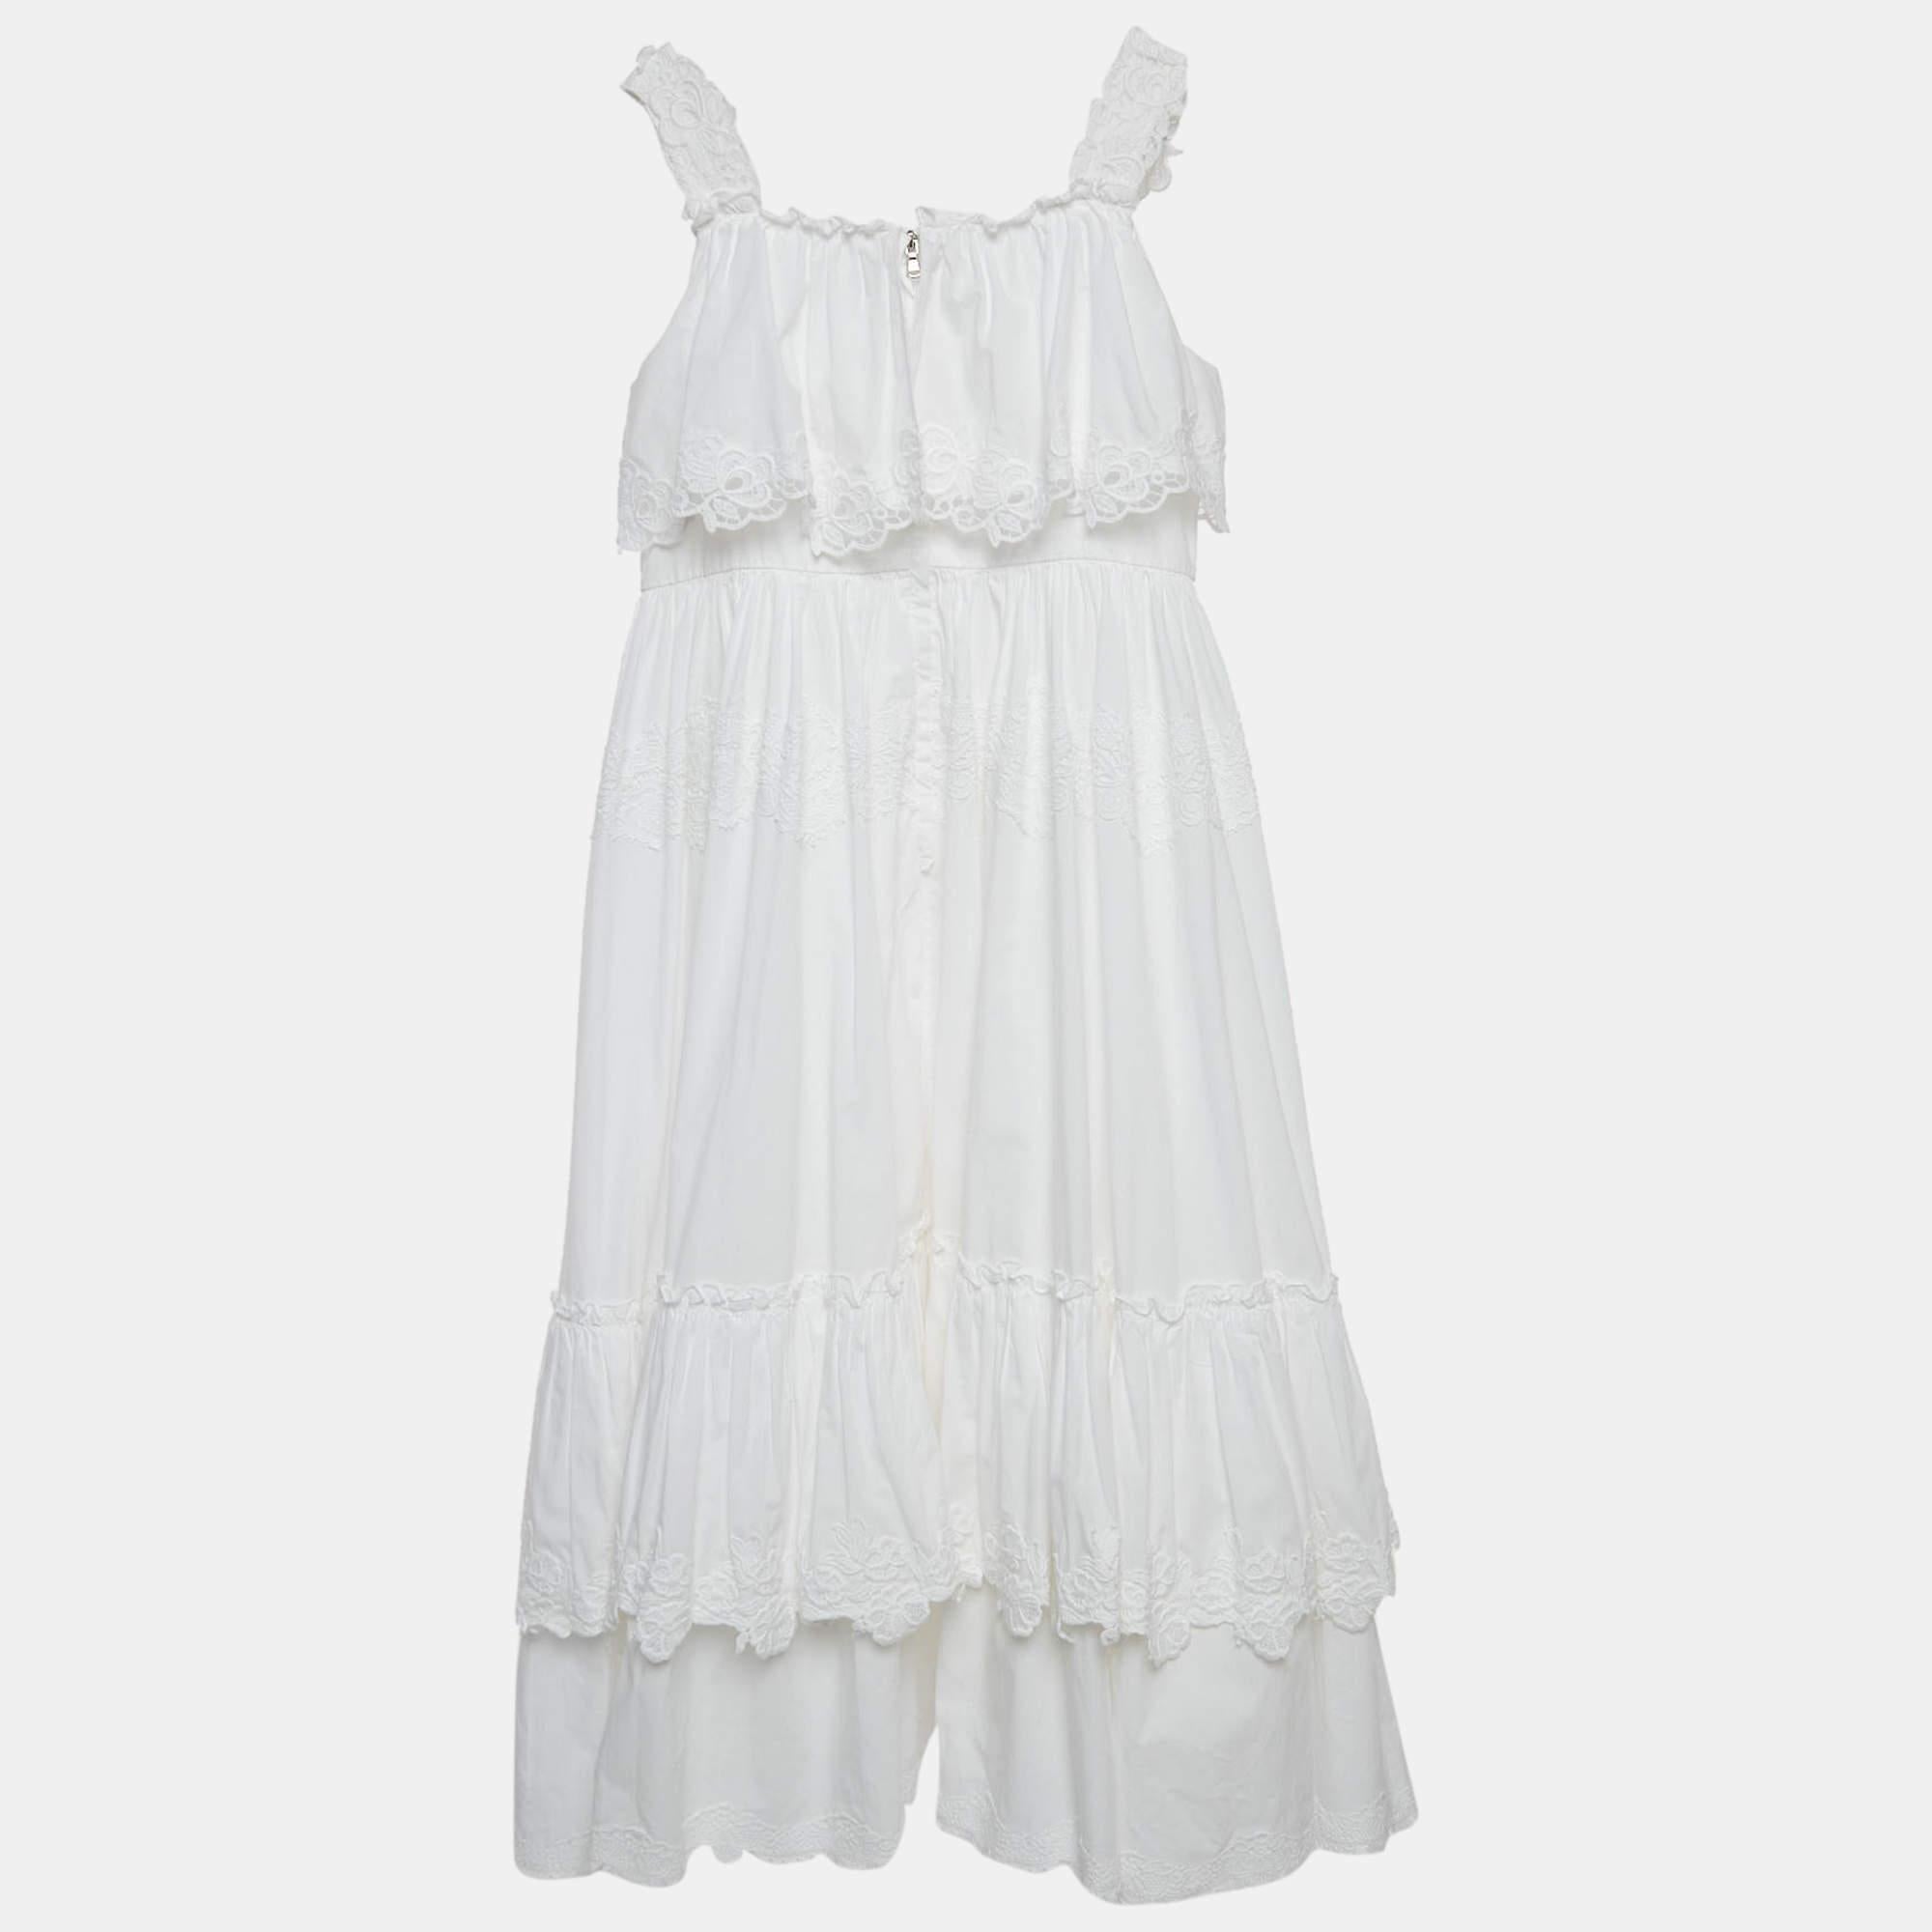 The Dolce & Gabbana dress epitomizes timeless elegance. Crafted from pristine cotton, the dress features delicate lace trimmings that add a touch of romantic sophistication. With a flattering silhouette and meticulous detailing, it seamlessly blends